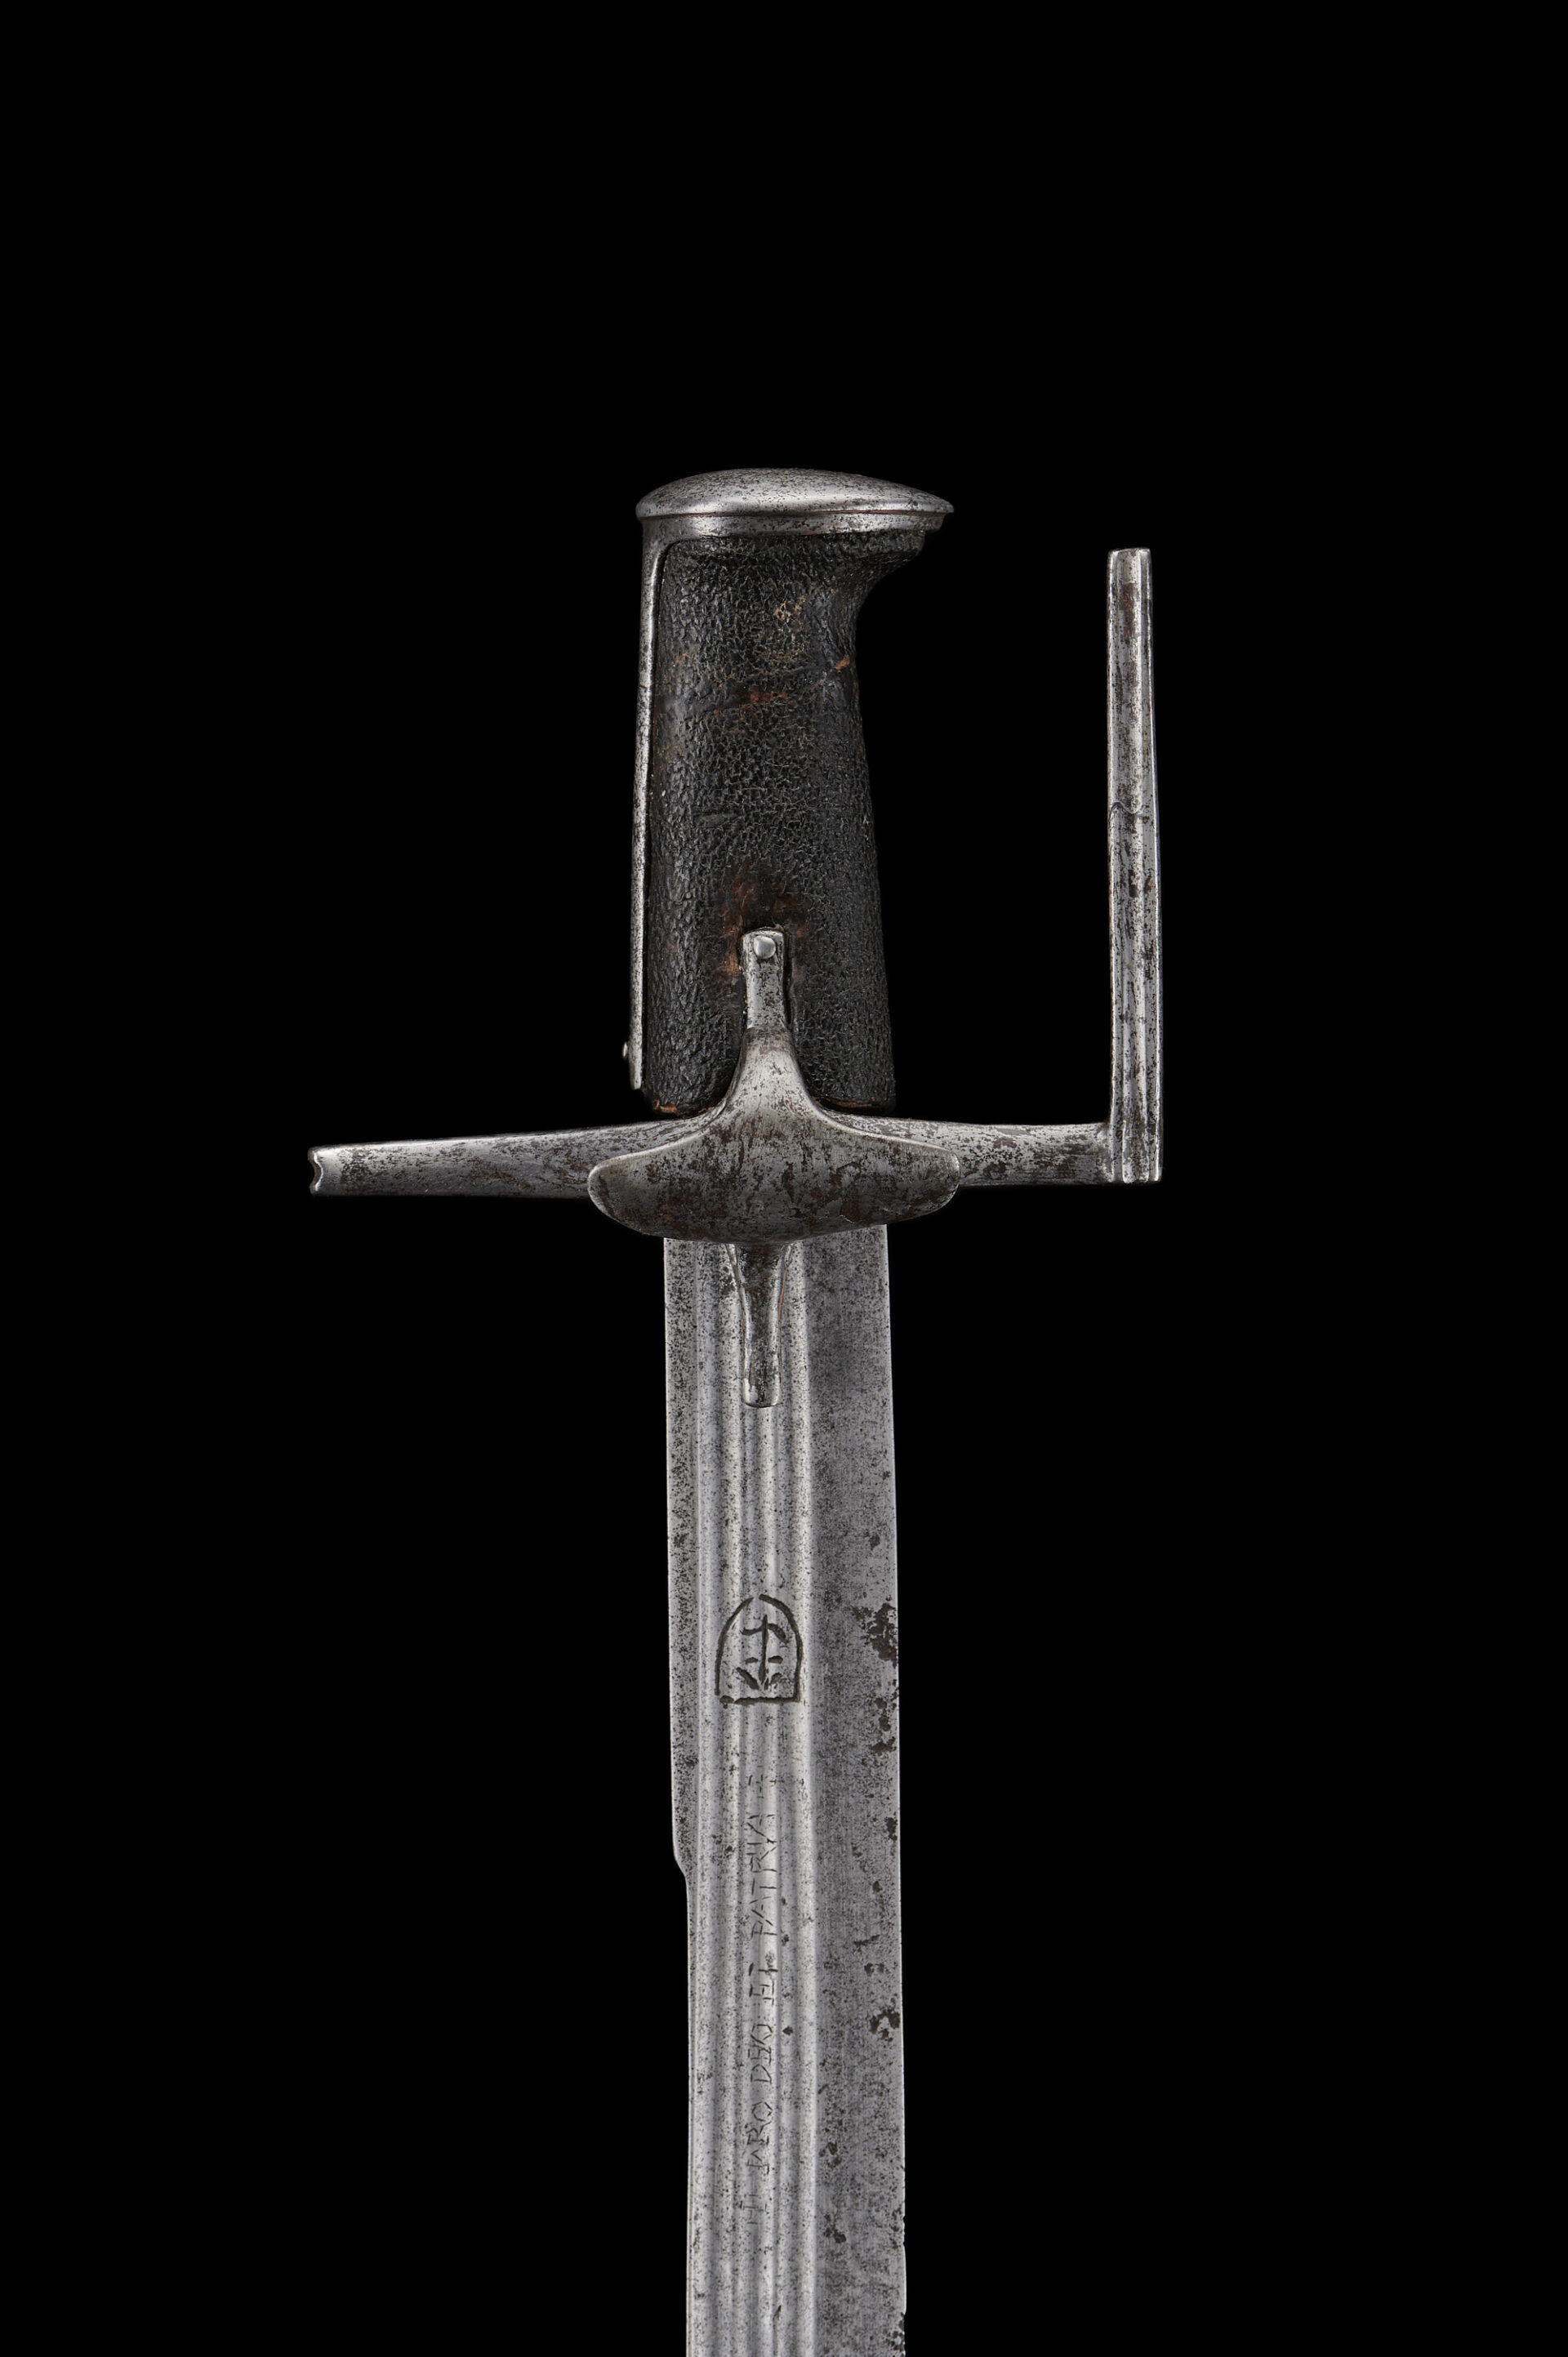 A POLISH – LITHUANIAN SABRE WITH INSCRIPTION "PRO DEO ET PATRIA" ON THE BLADE, 17TH CENTURY